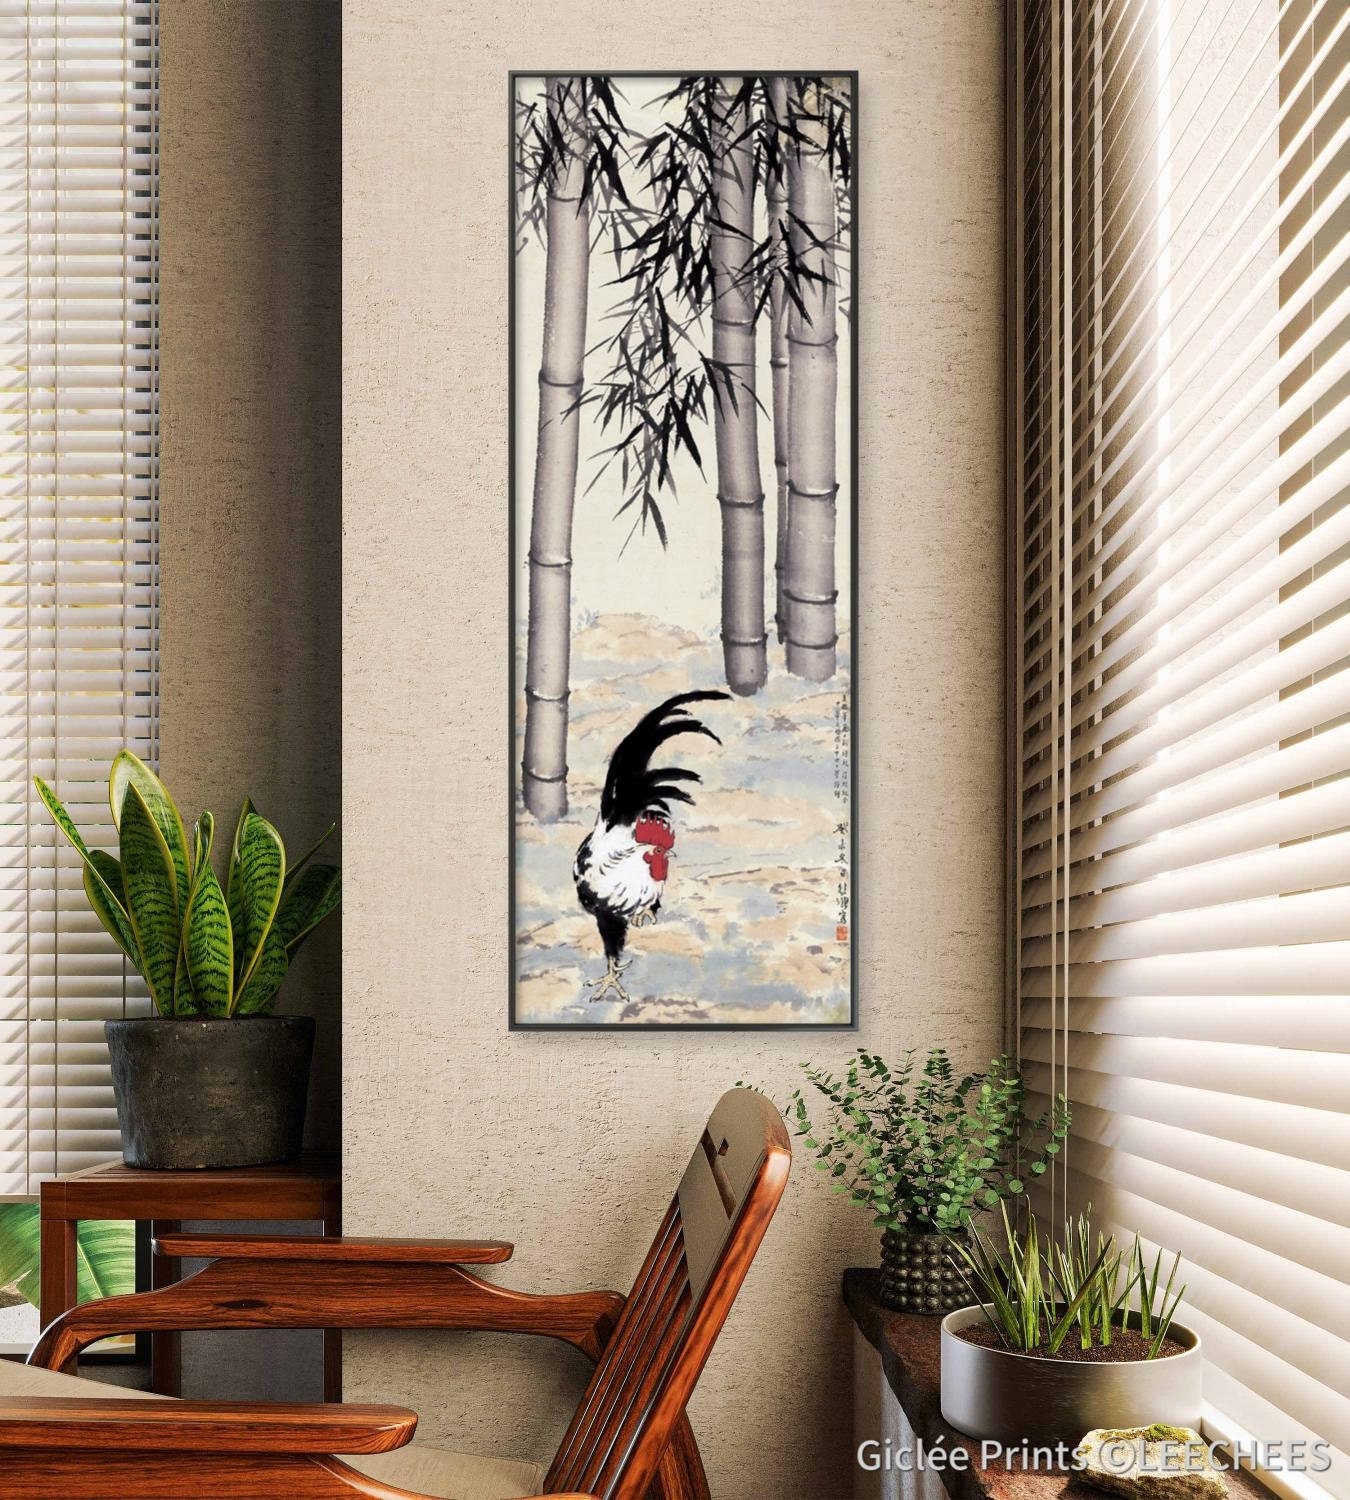 Buy Bamboo Pokemon Wall Scroll / Decor Vintage 90s Toy / Vintage